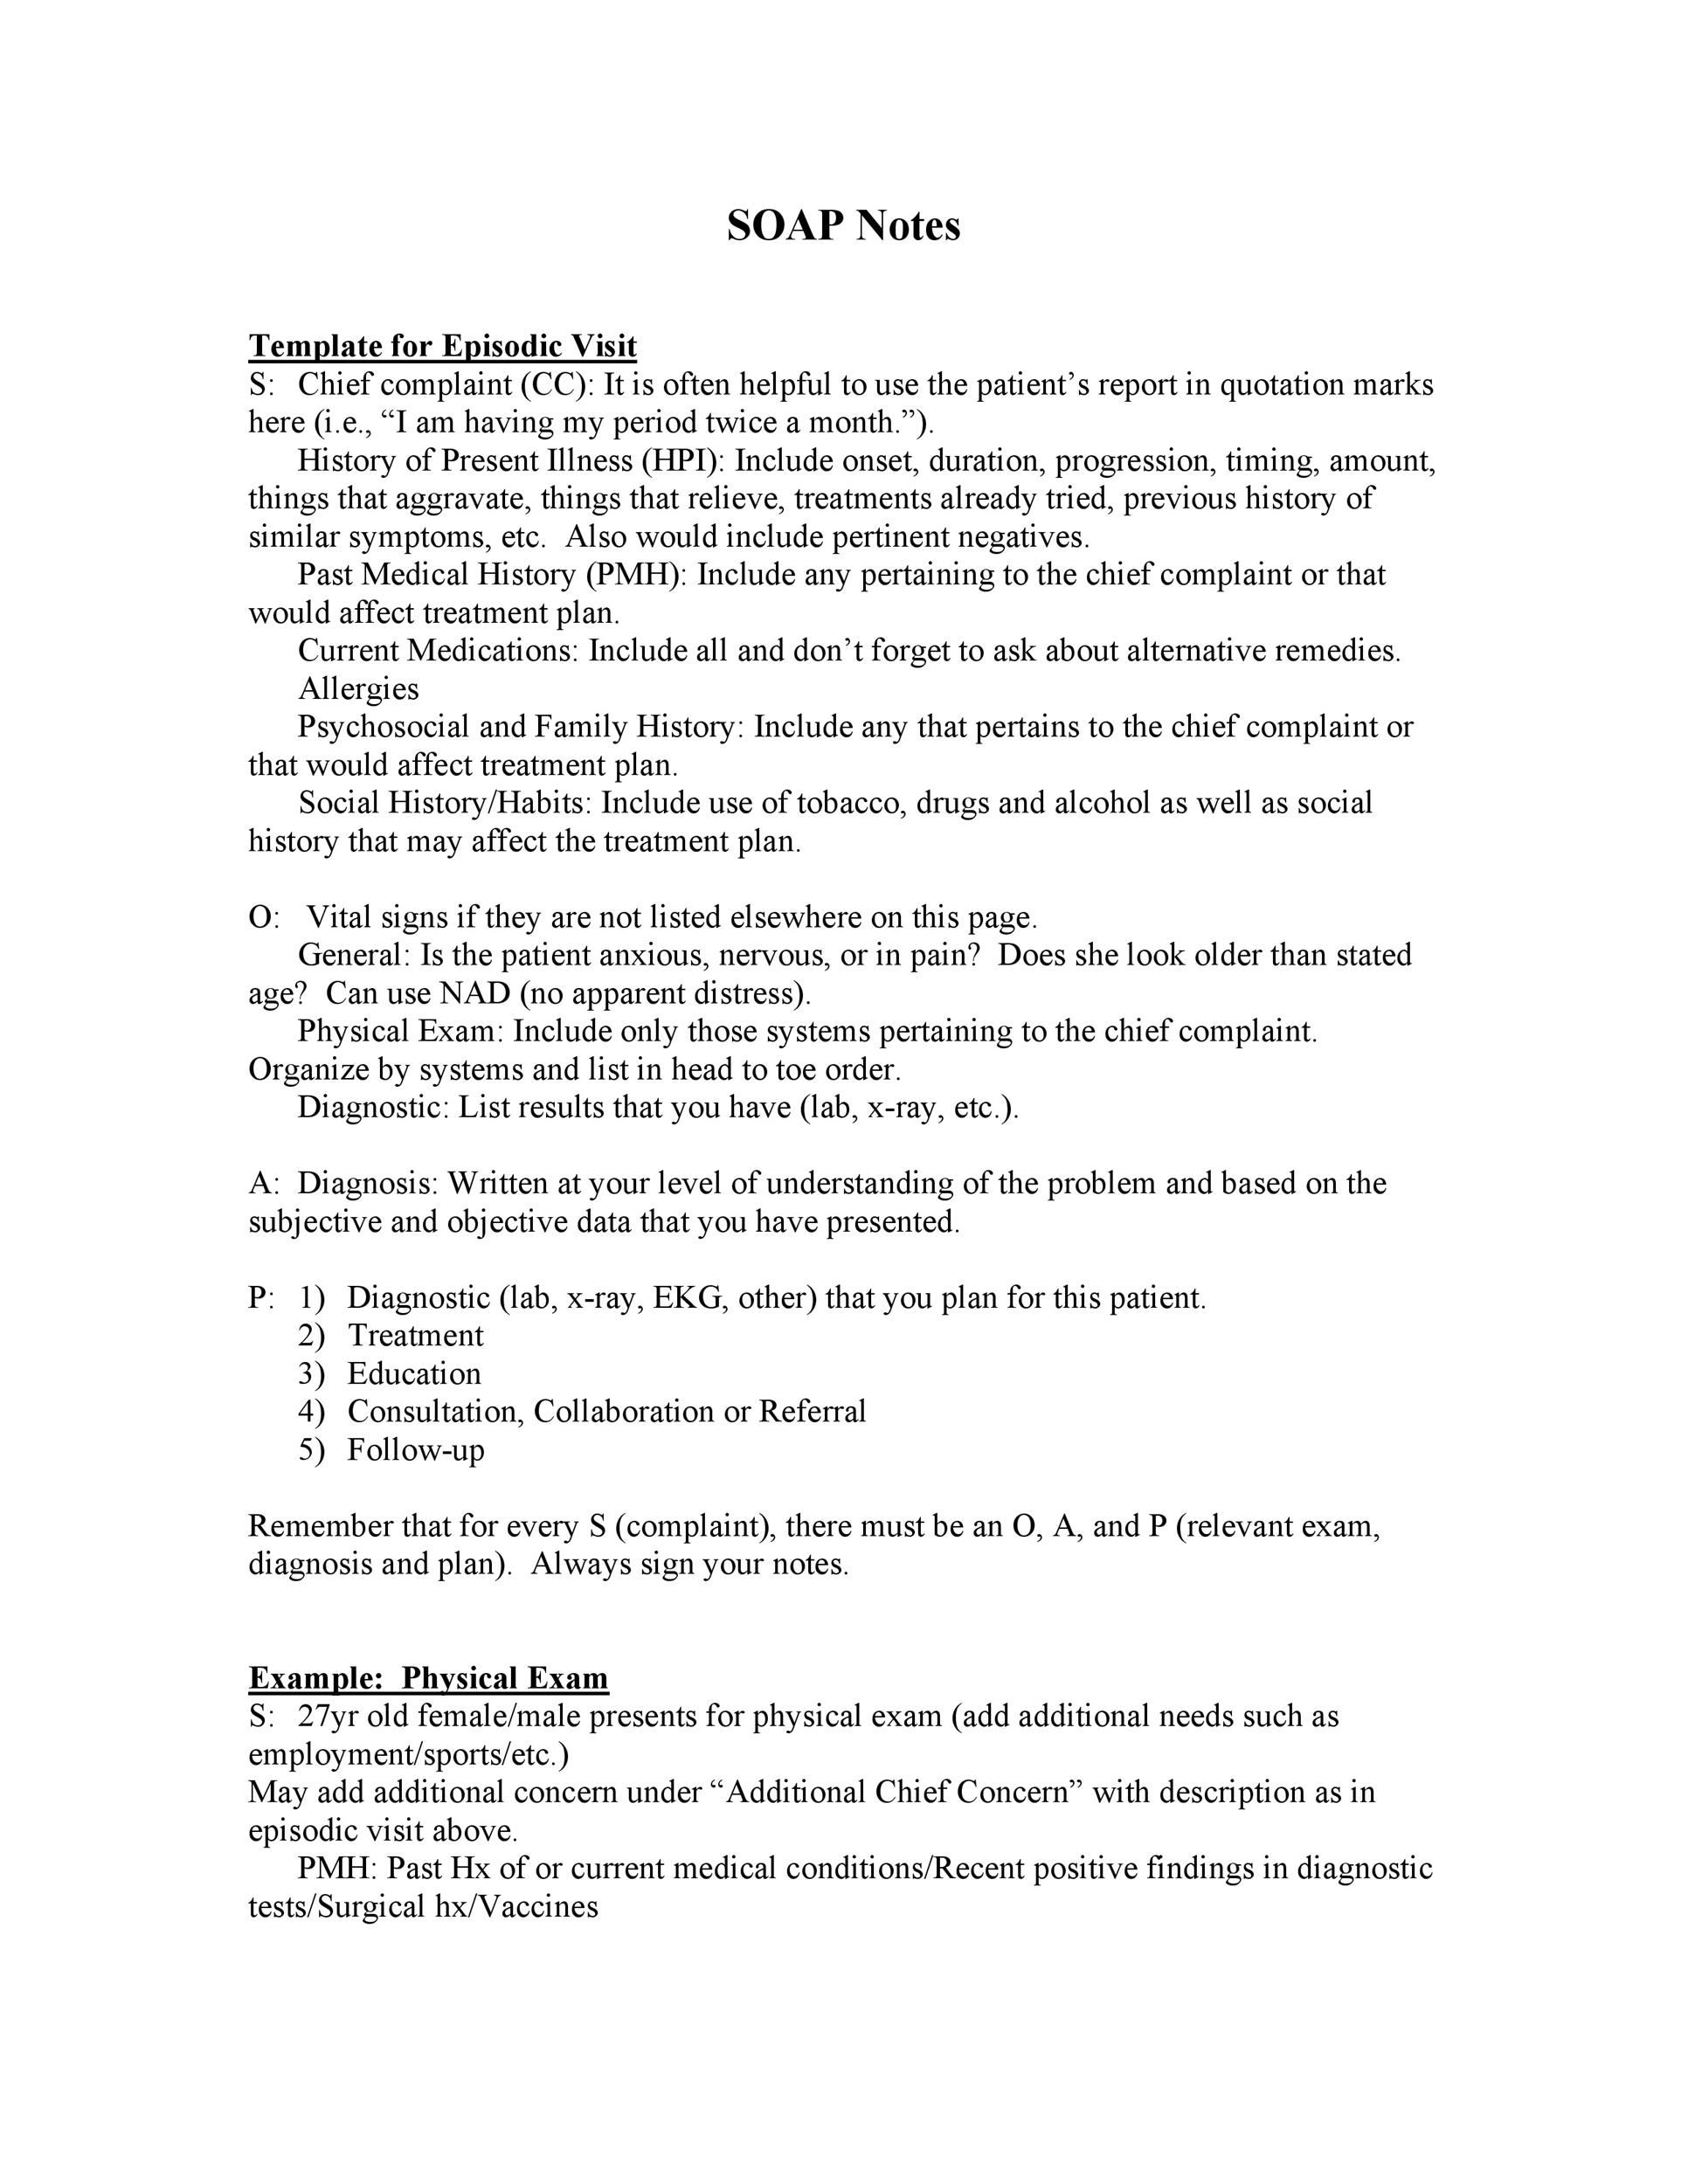 Physical Exam Note Template